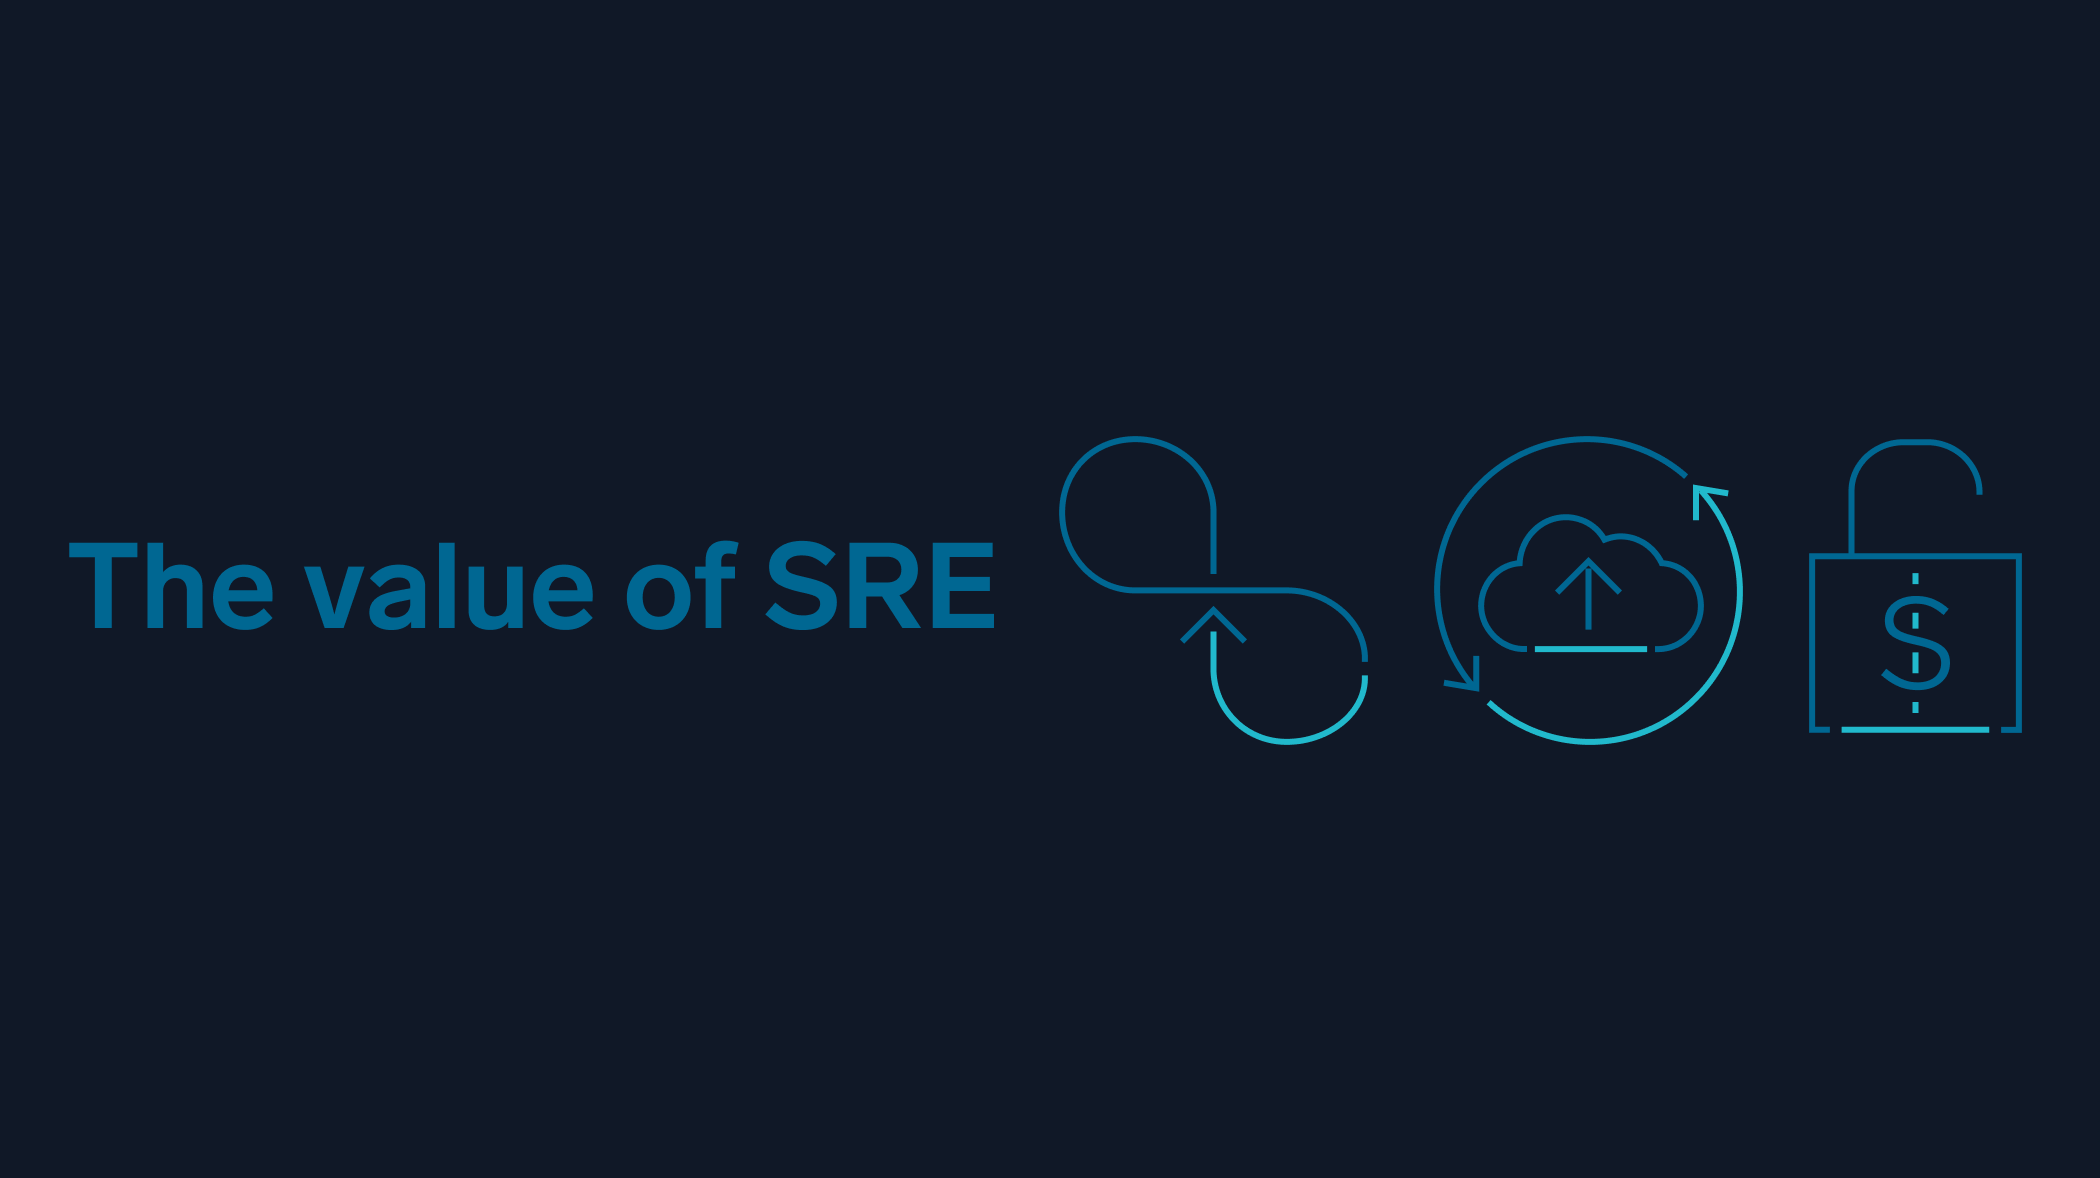 Tales from the Toil: Taking the pulse of SRE